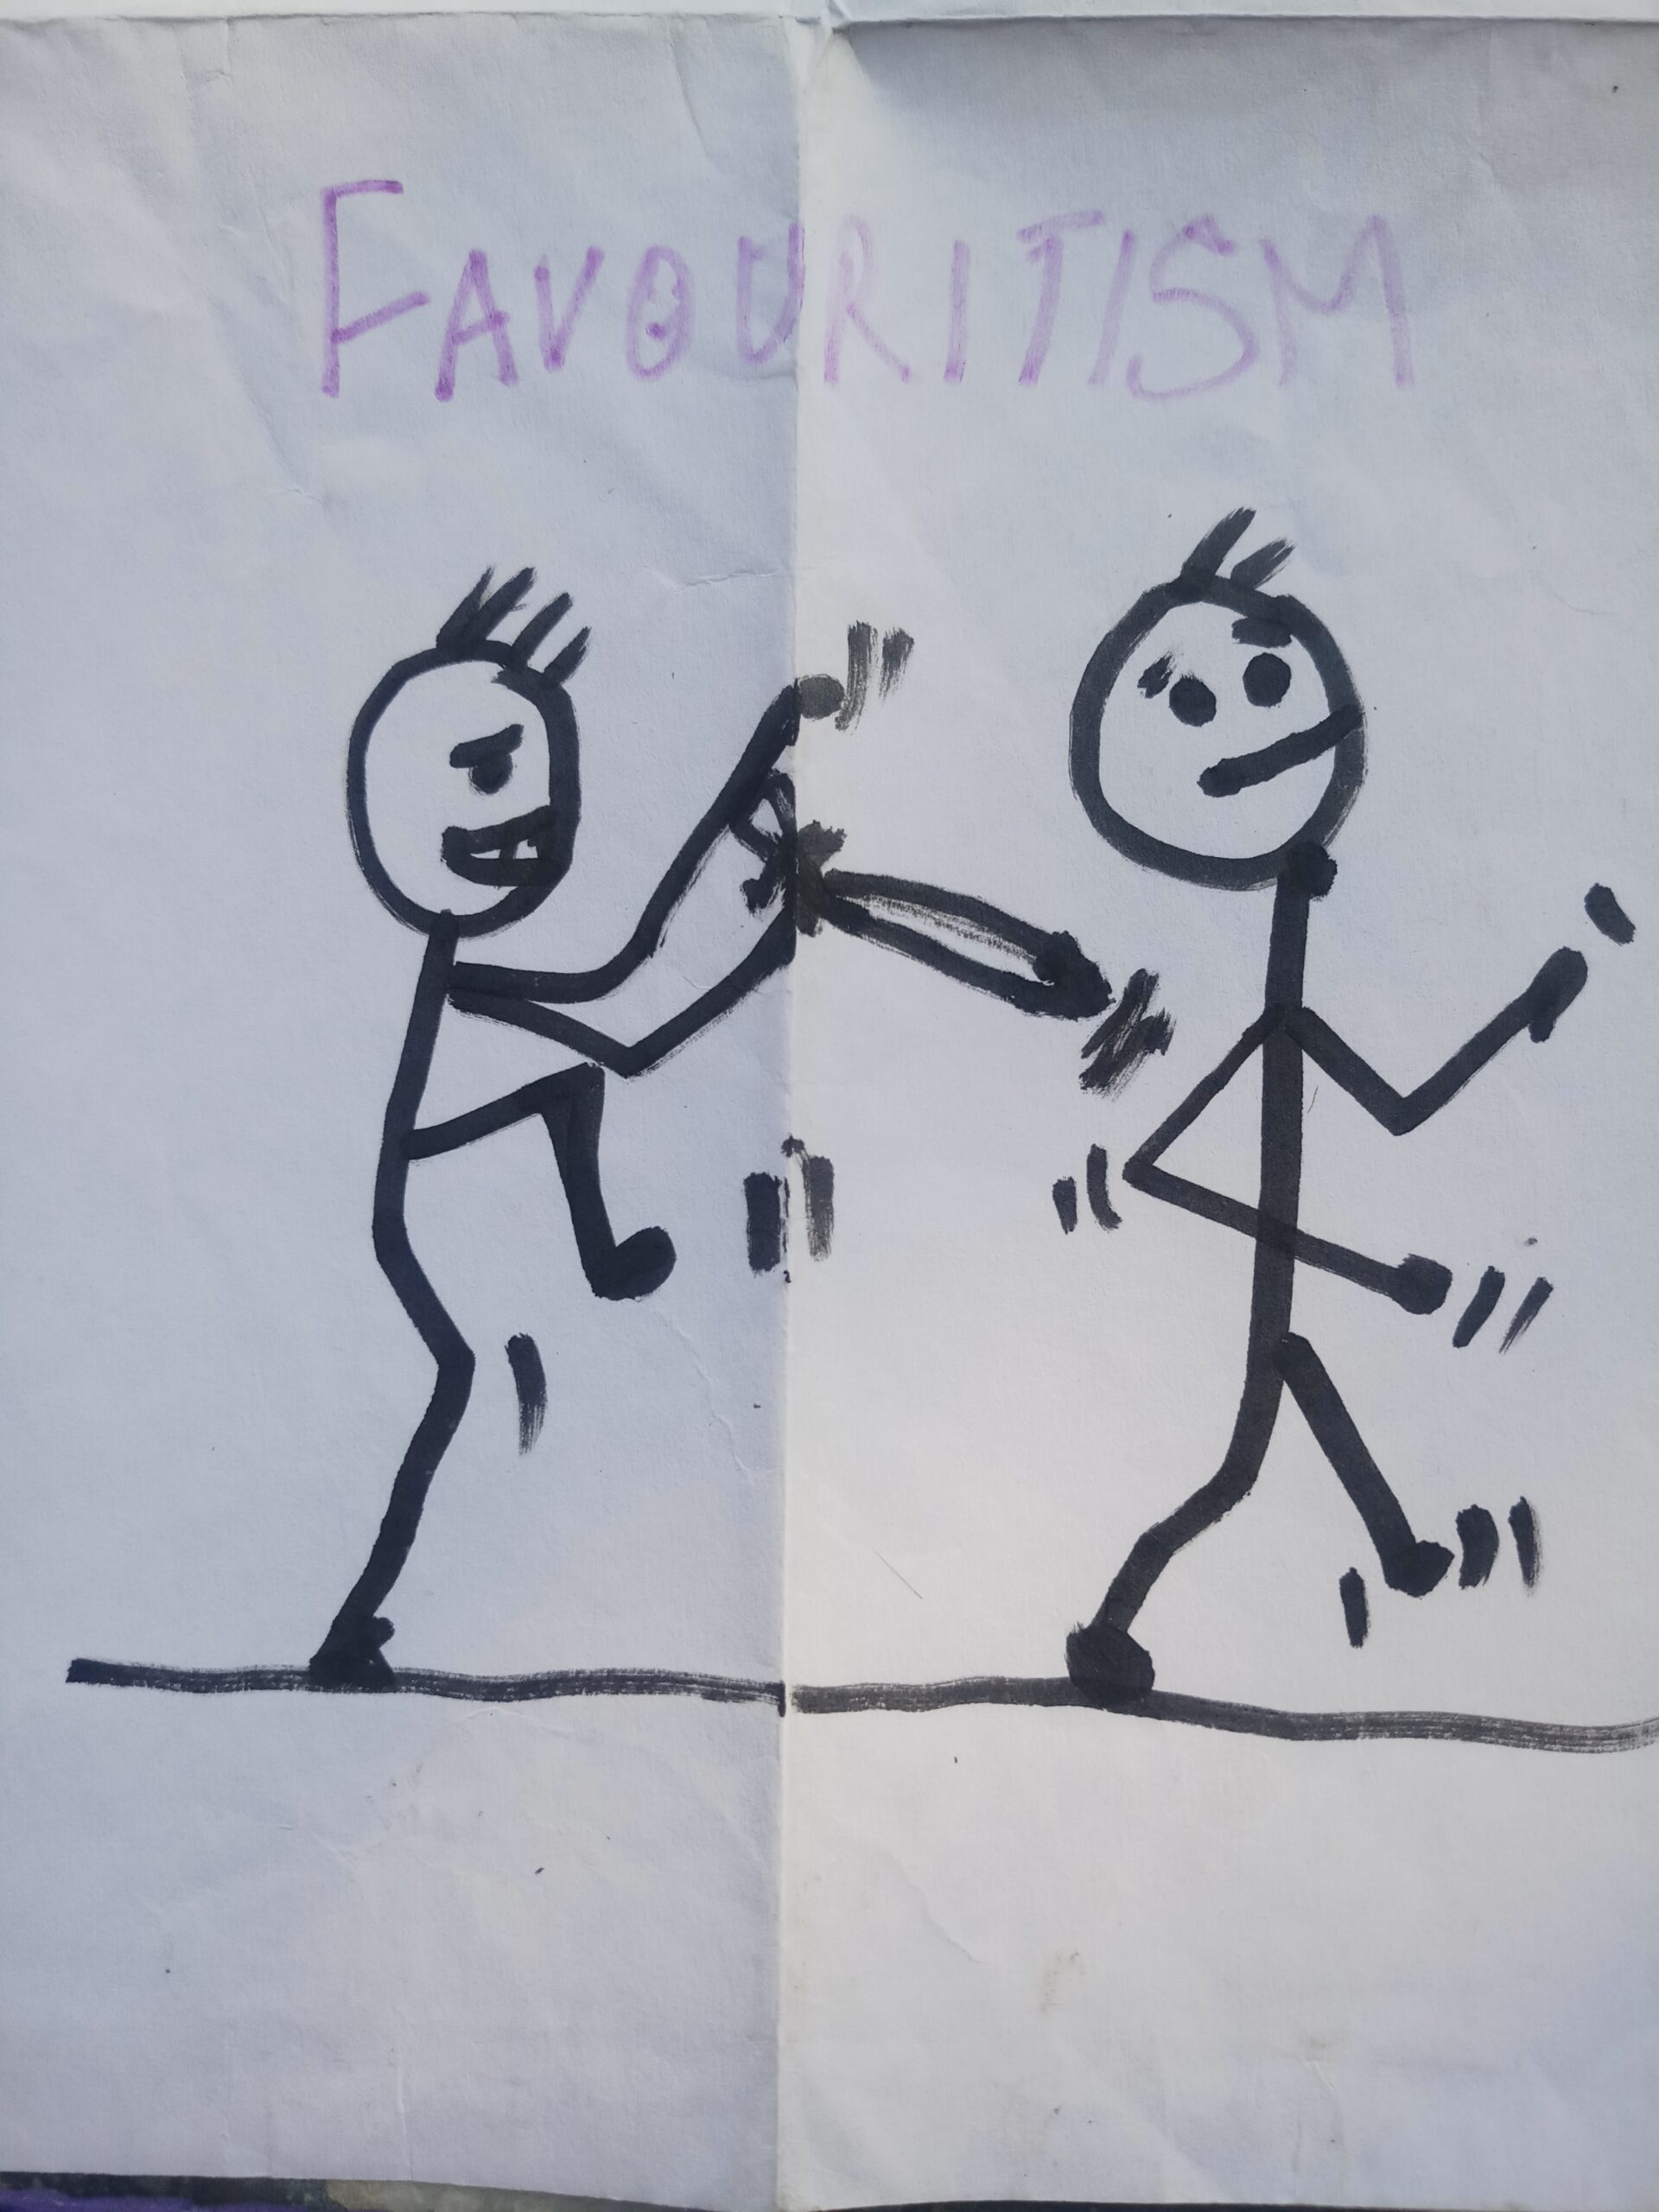 Drawing of favouritism